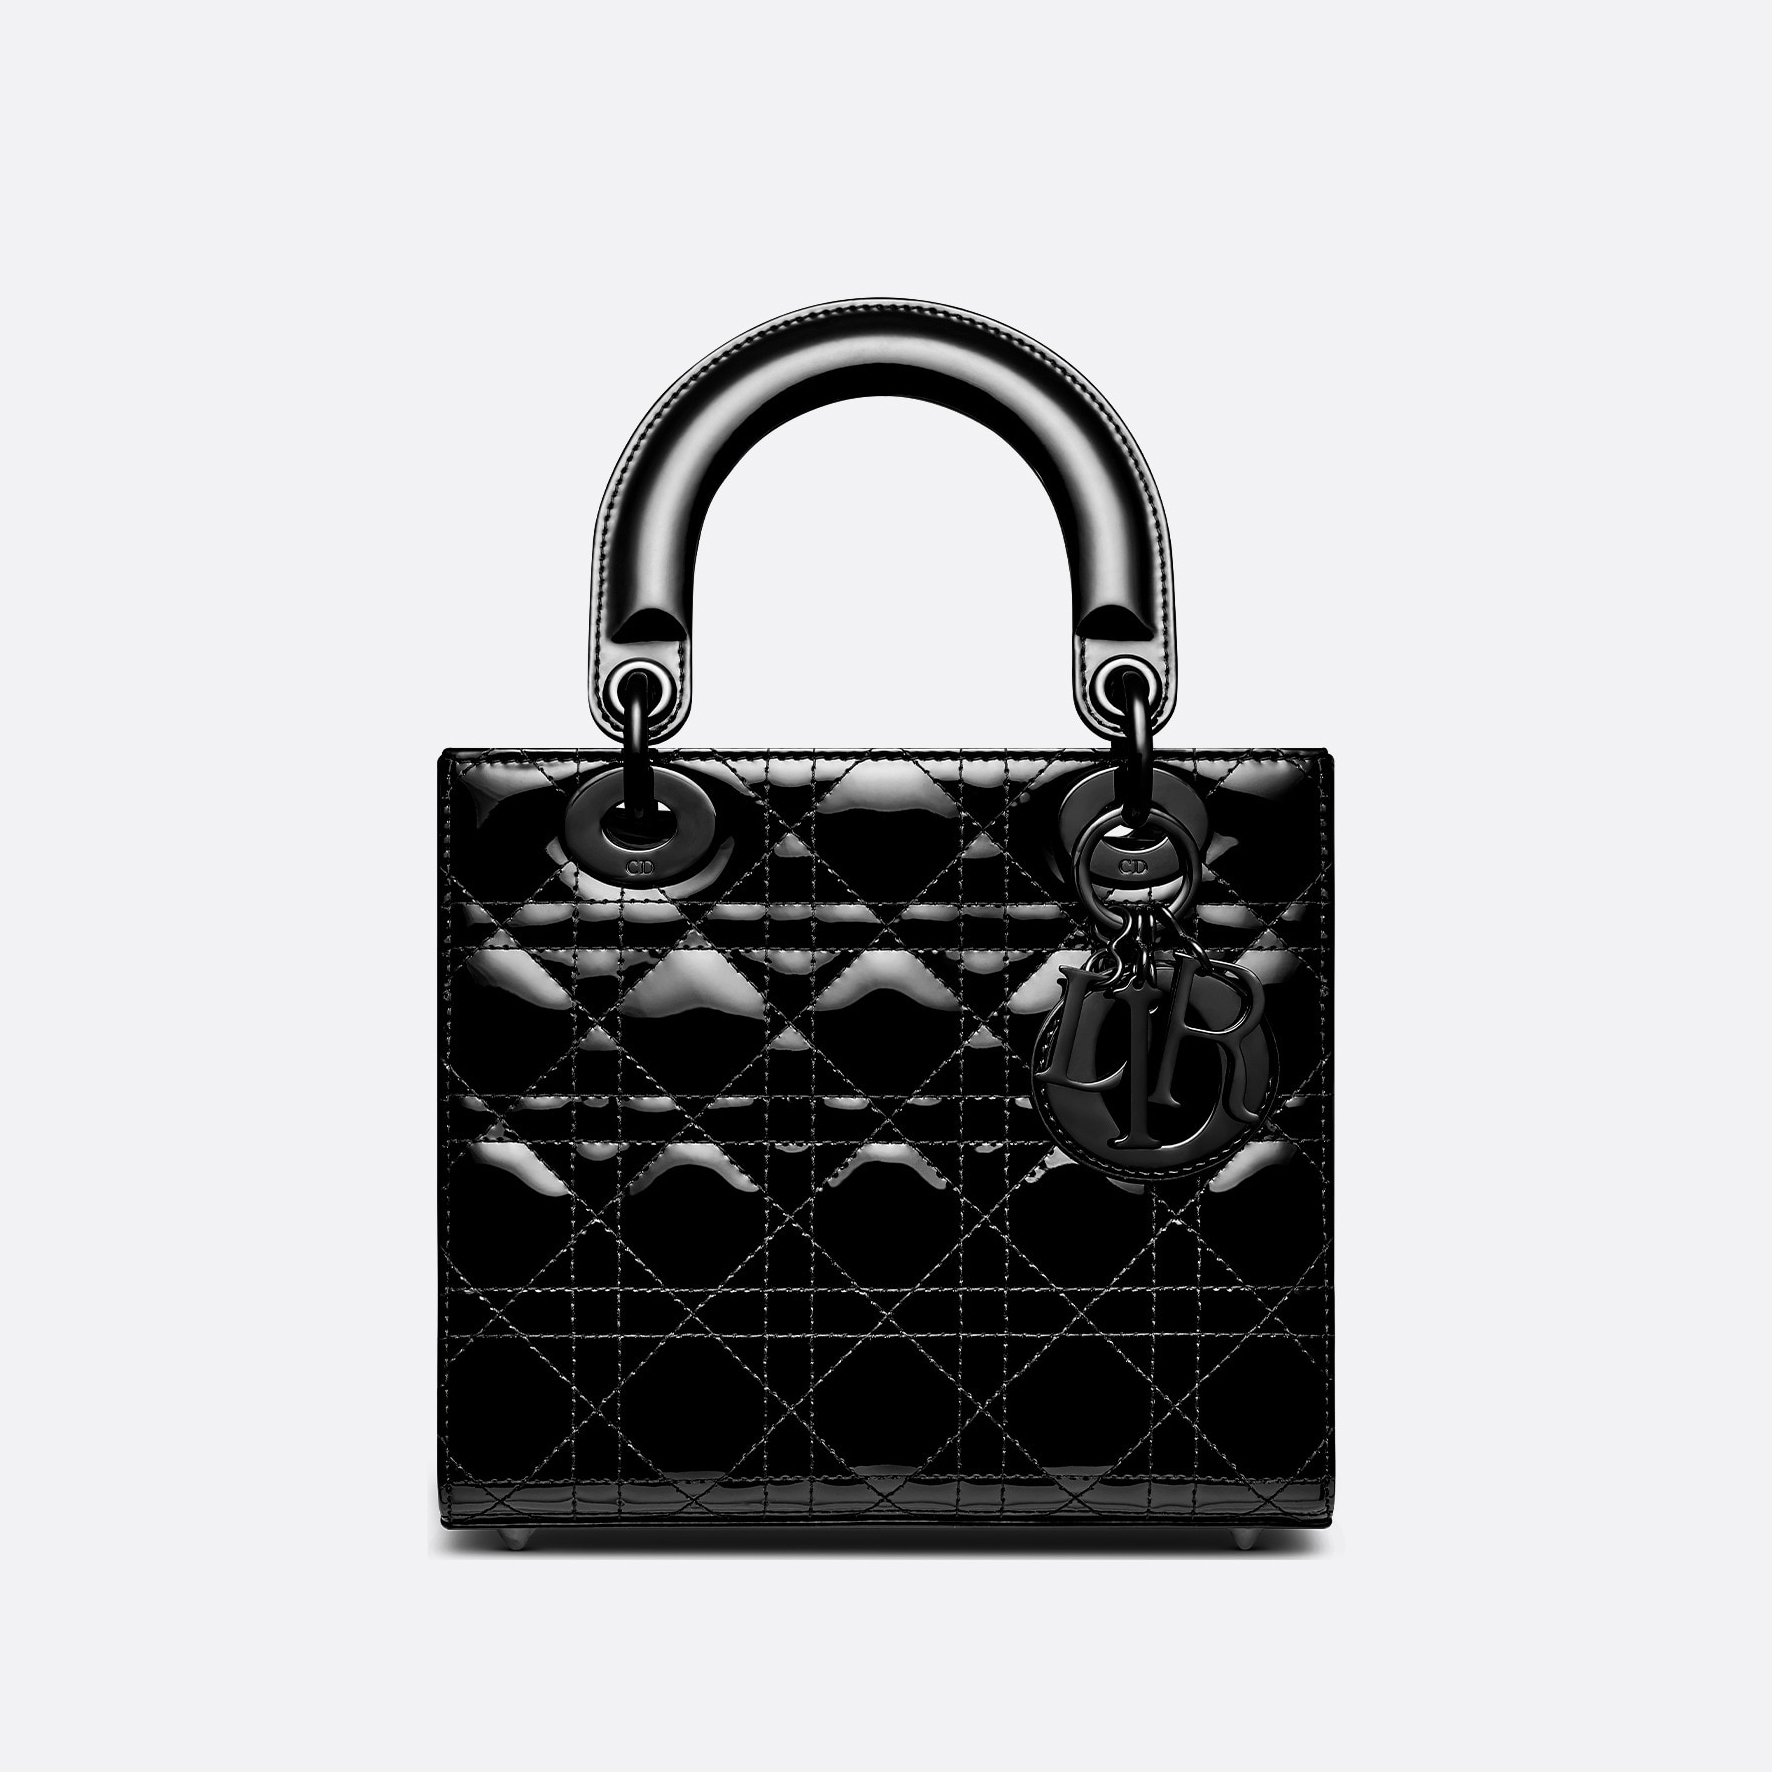 Shop: 10 of the Most Popular Dior Bags of All Time